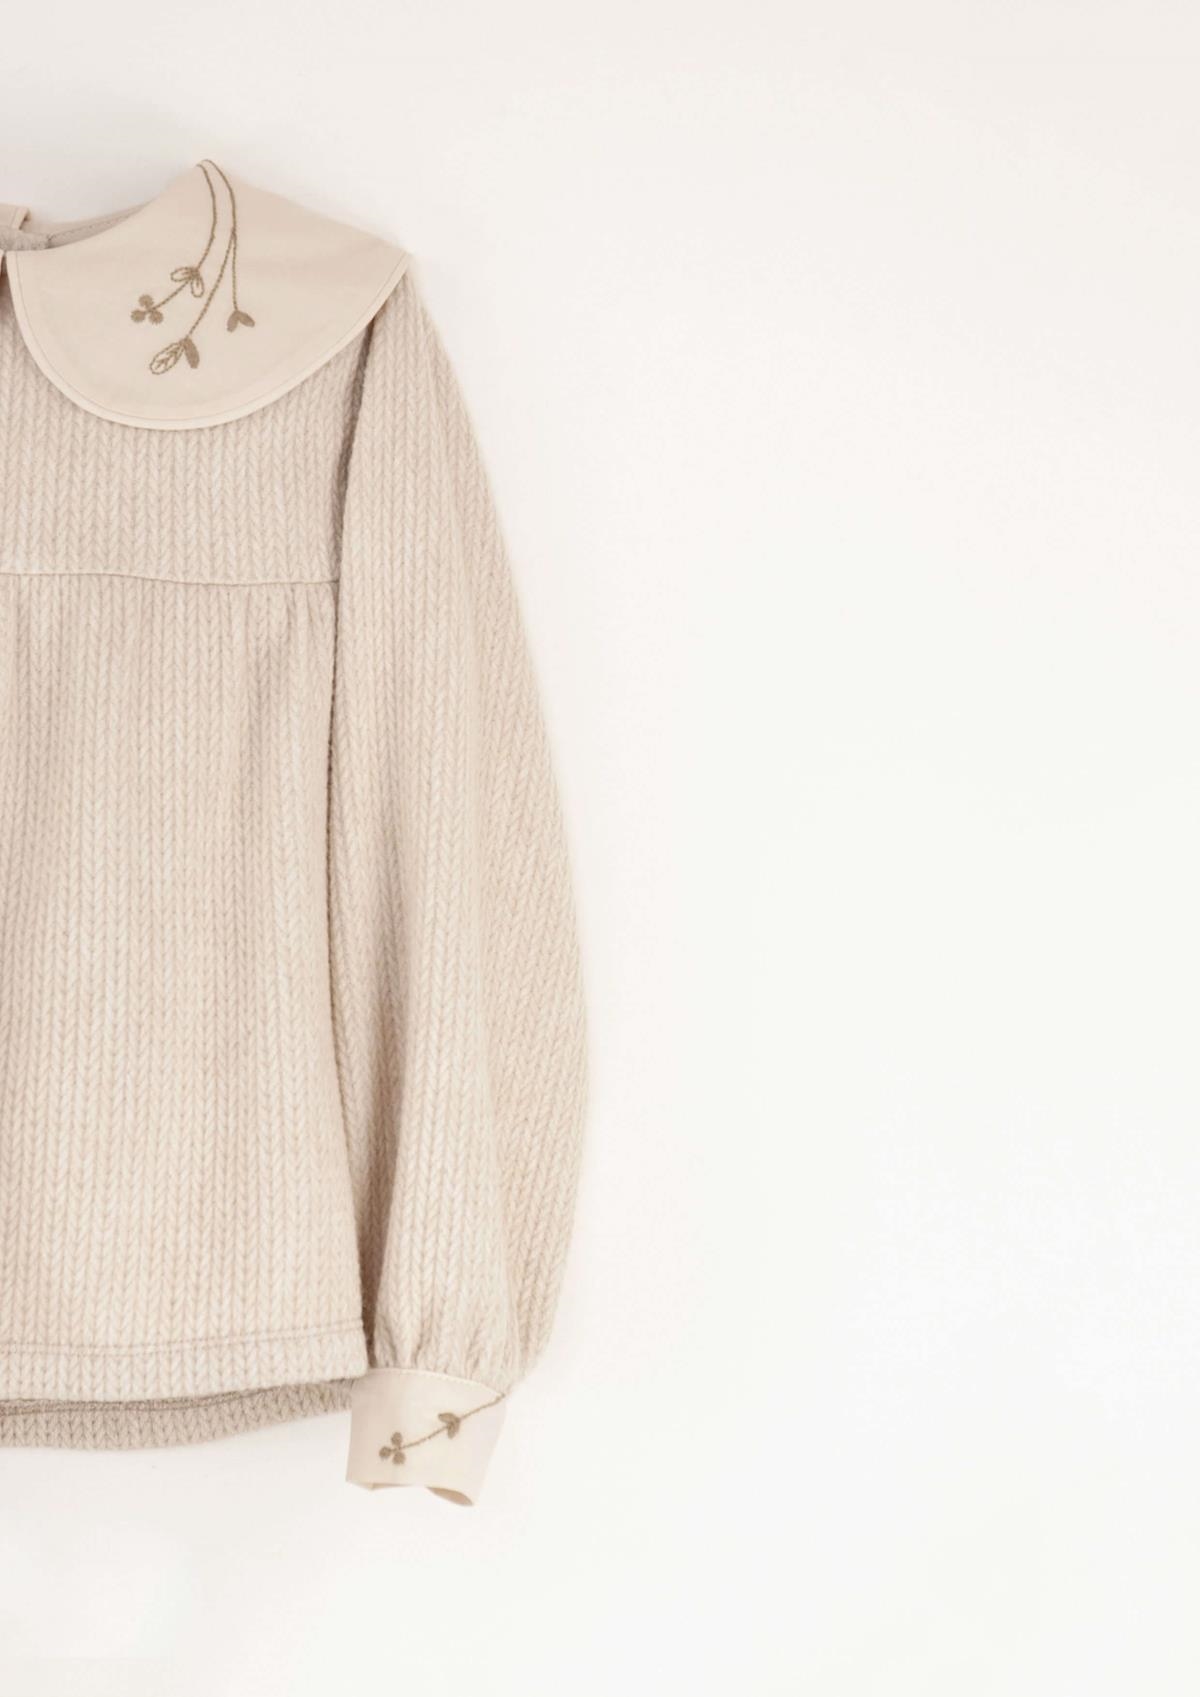 Mod.13.3 Knitted blouse with baby collar | AW23.24 Mod.13.3 Knitted blouse with baby collar